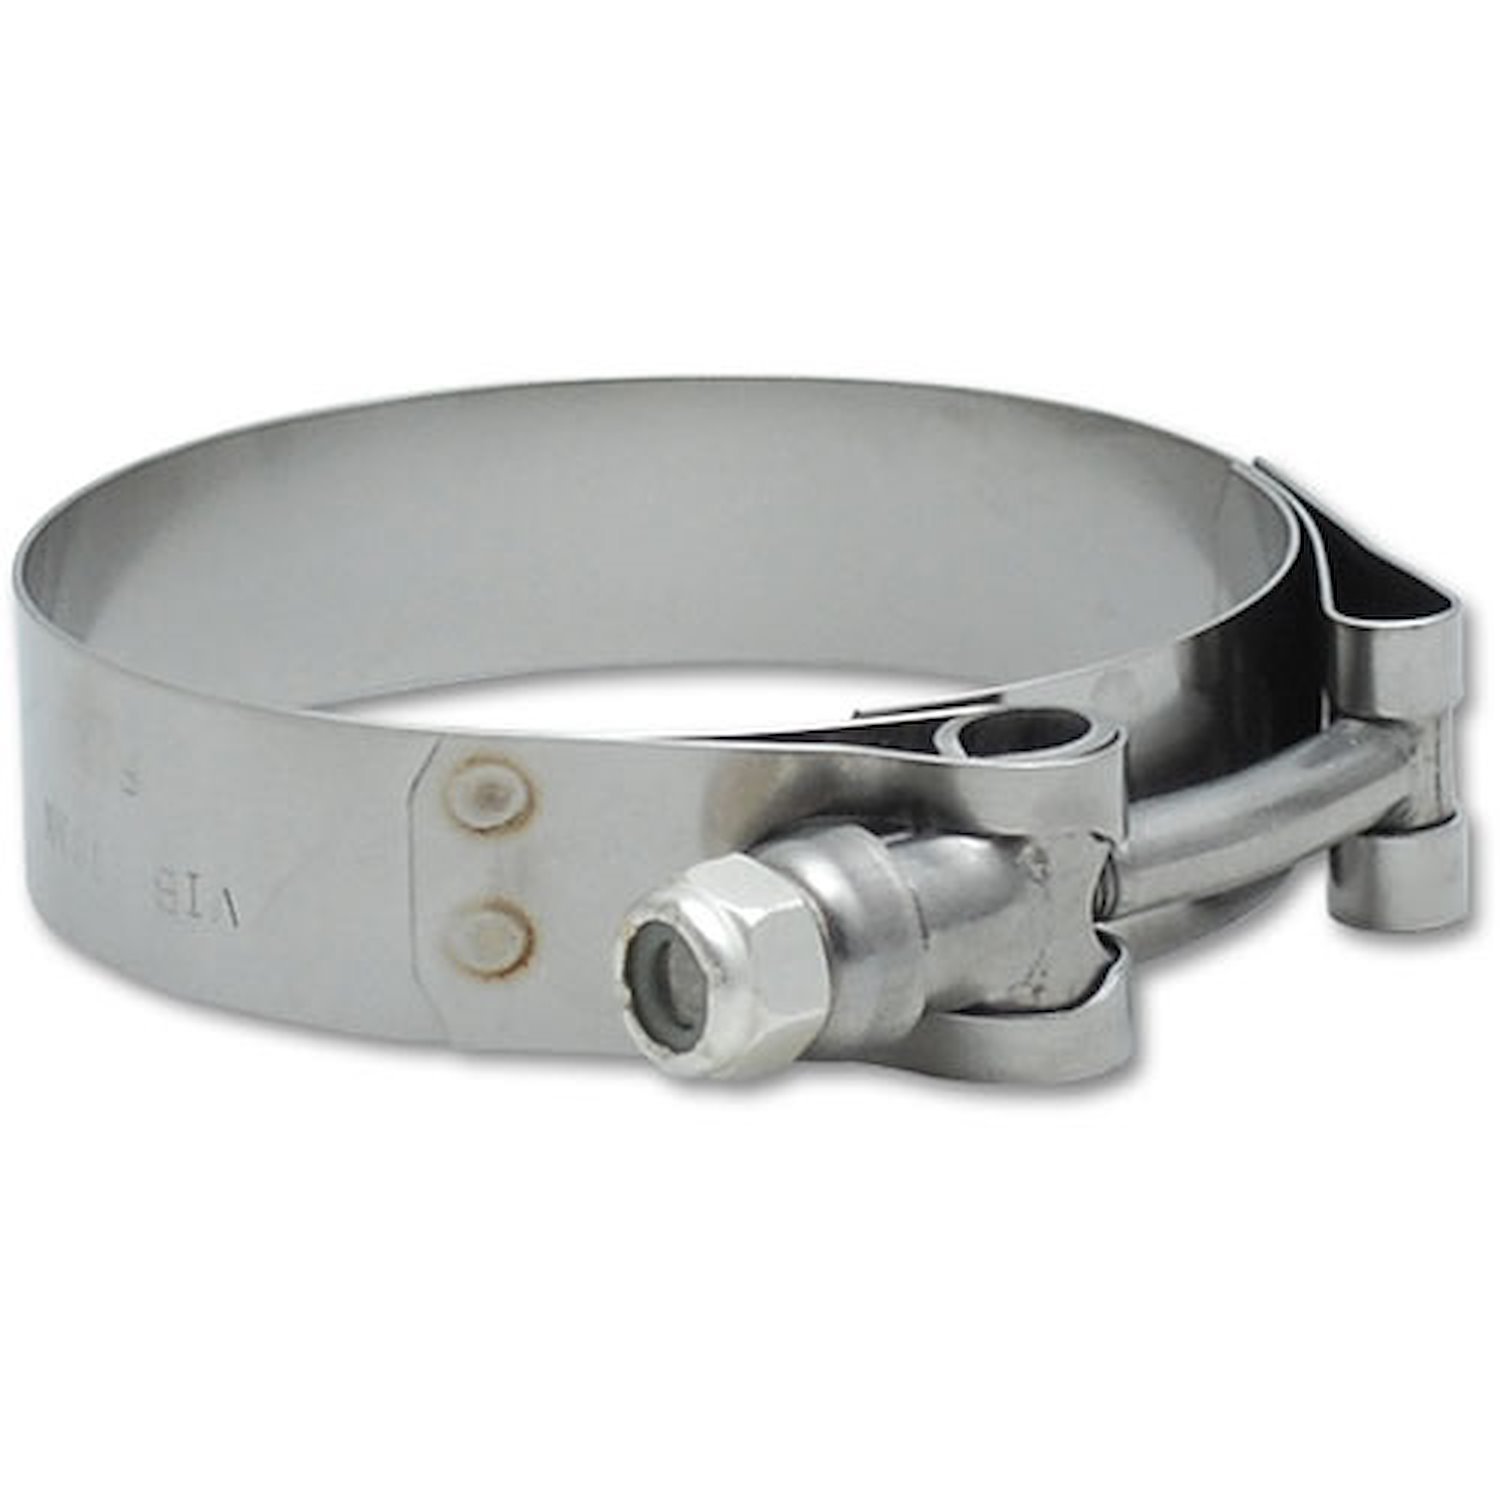 Stainless Steel T-Bolt Clamps Clamp Range 1.75" - 2.10"